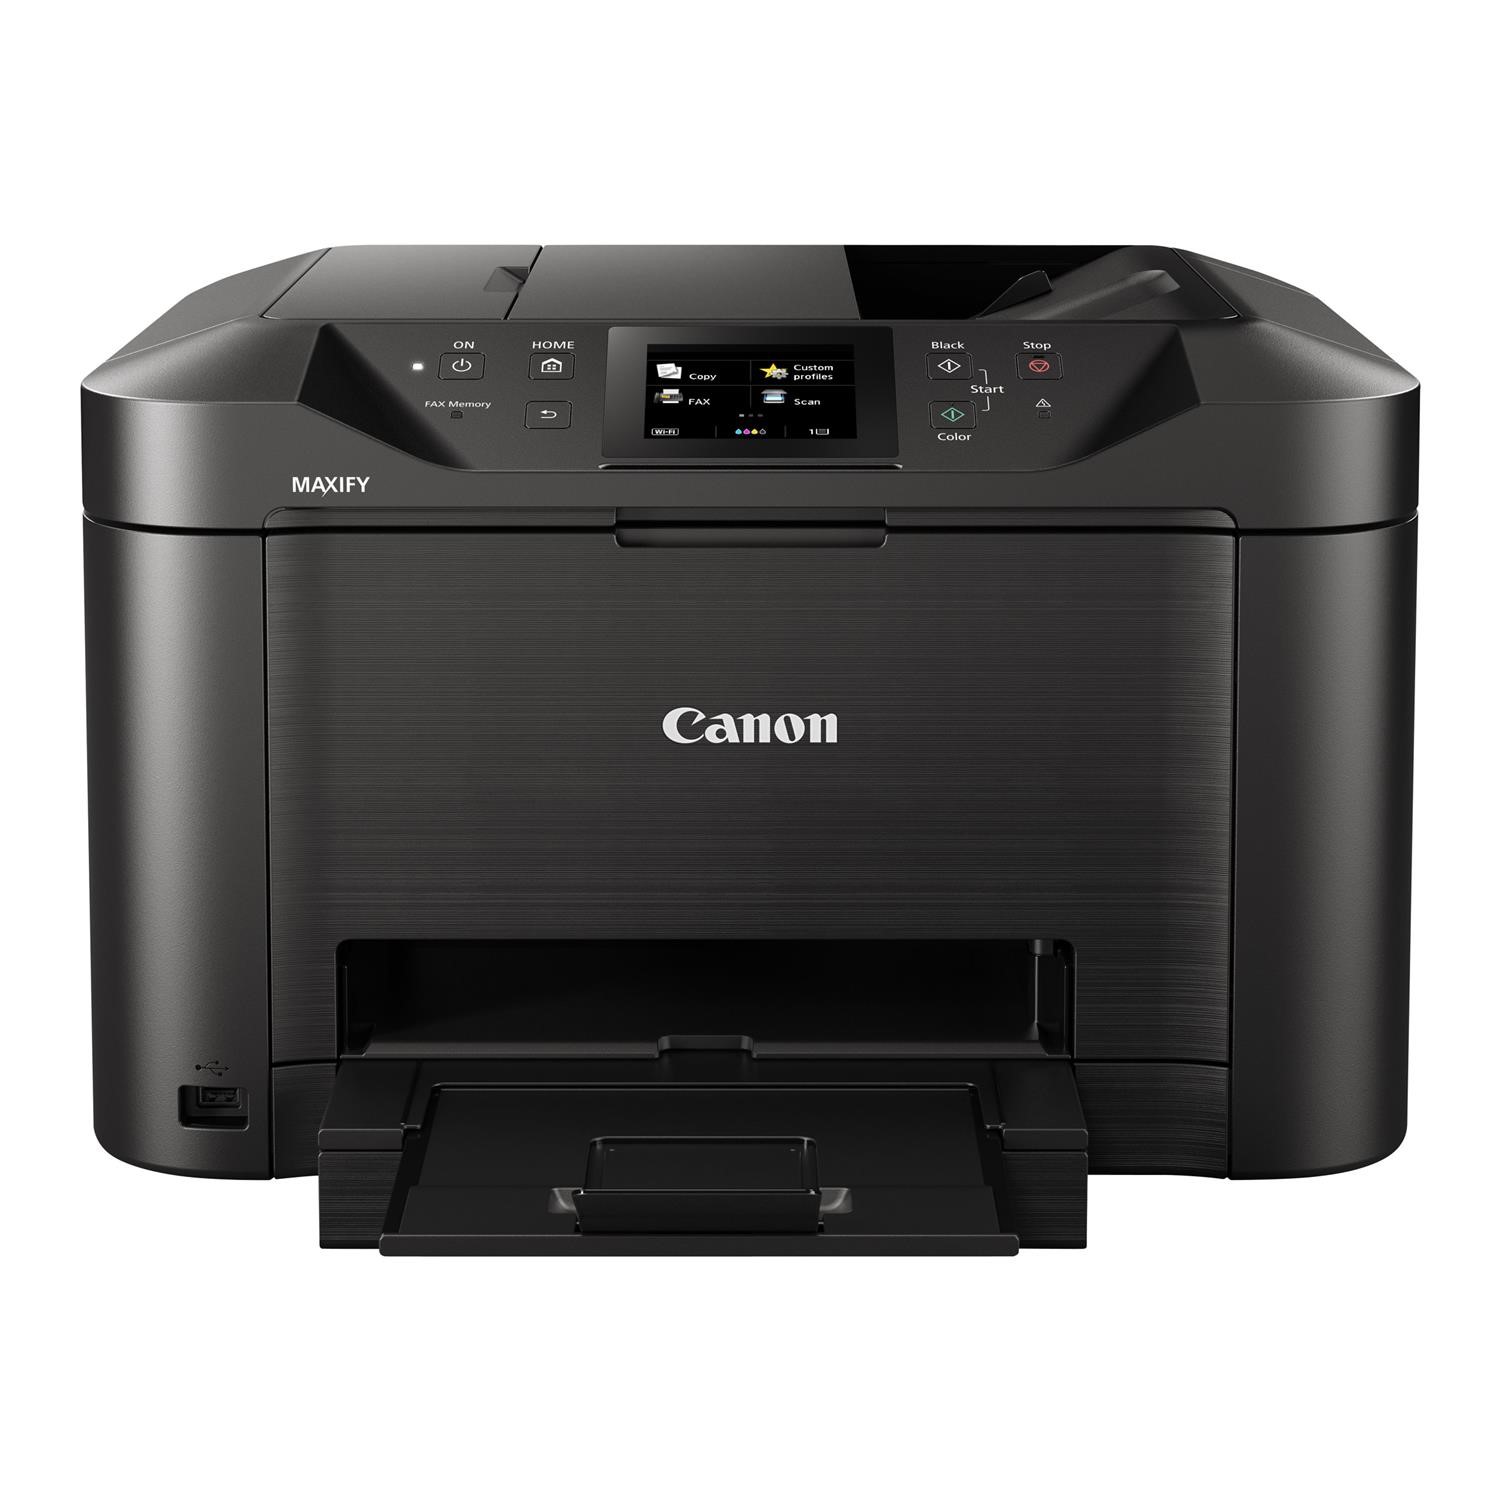 CANON Maxify MB5150 All-in-One Wireless Inkjet Printer with Fax, Black